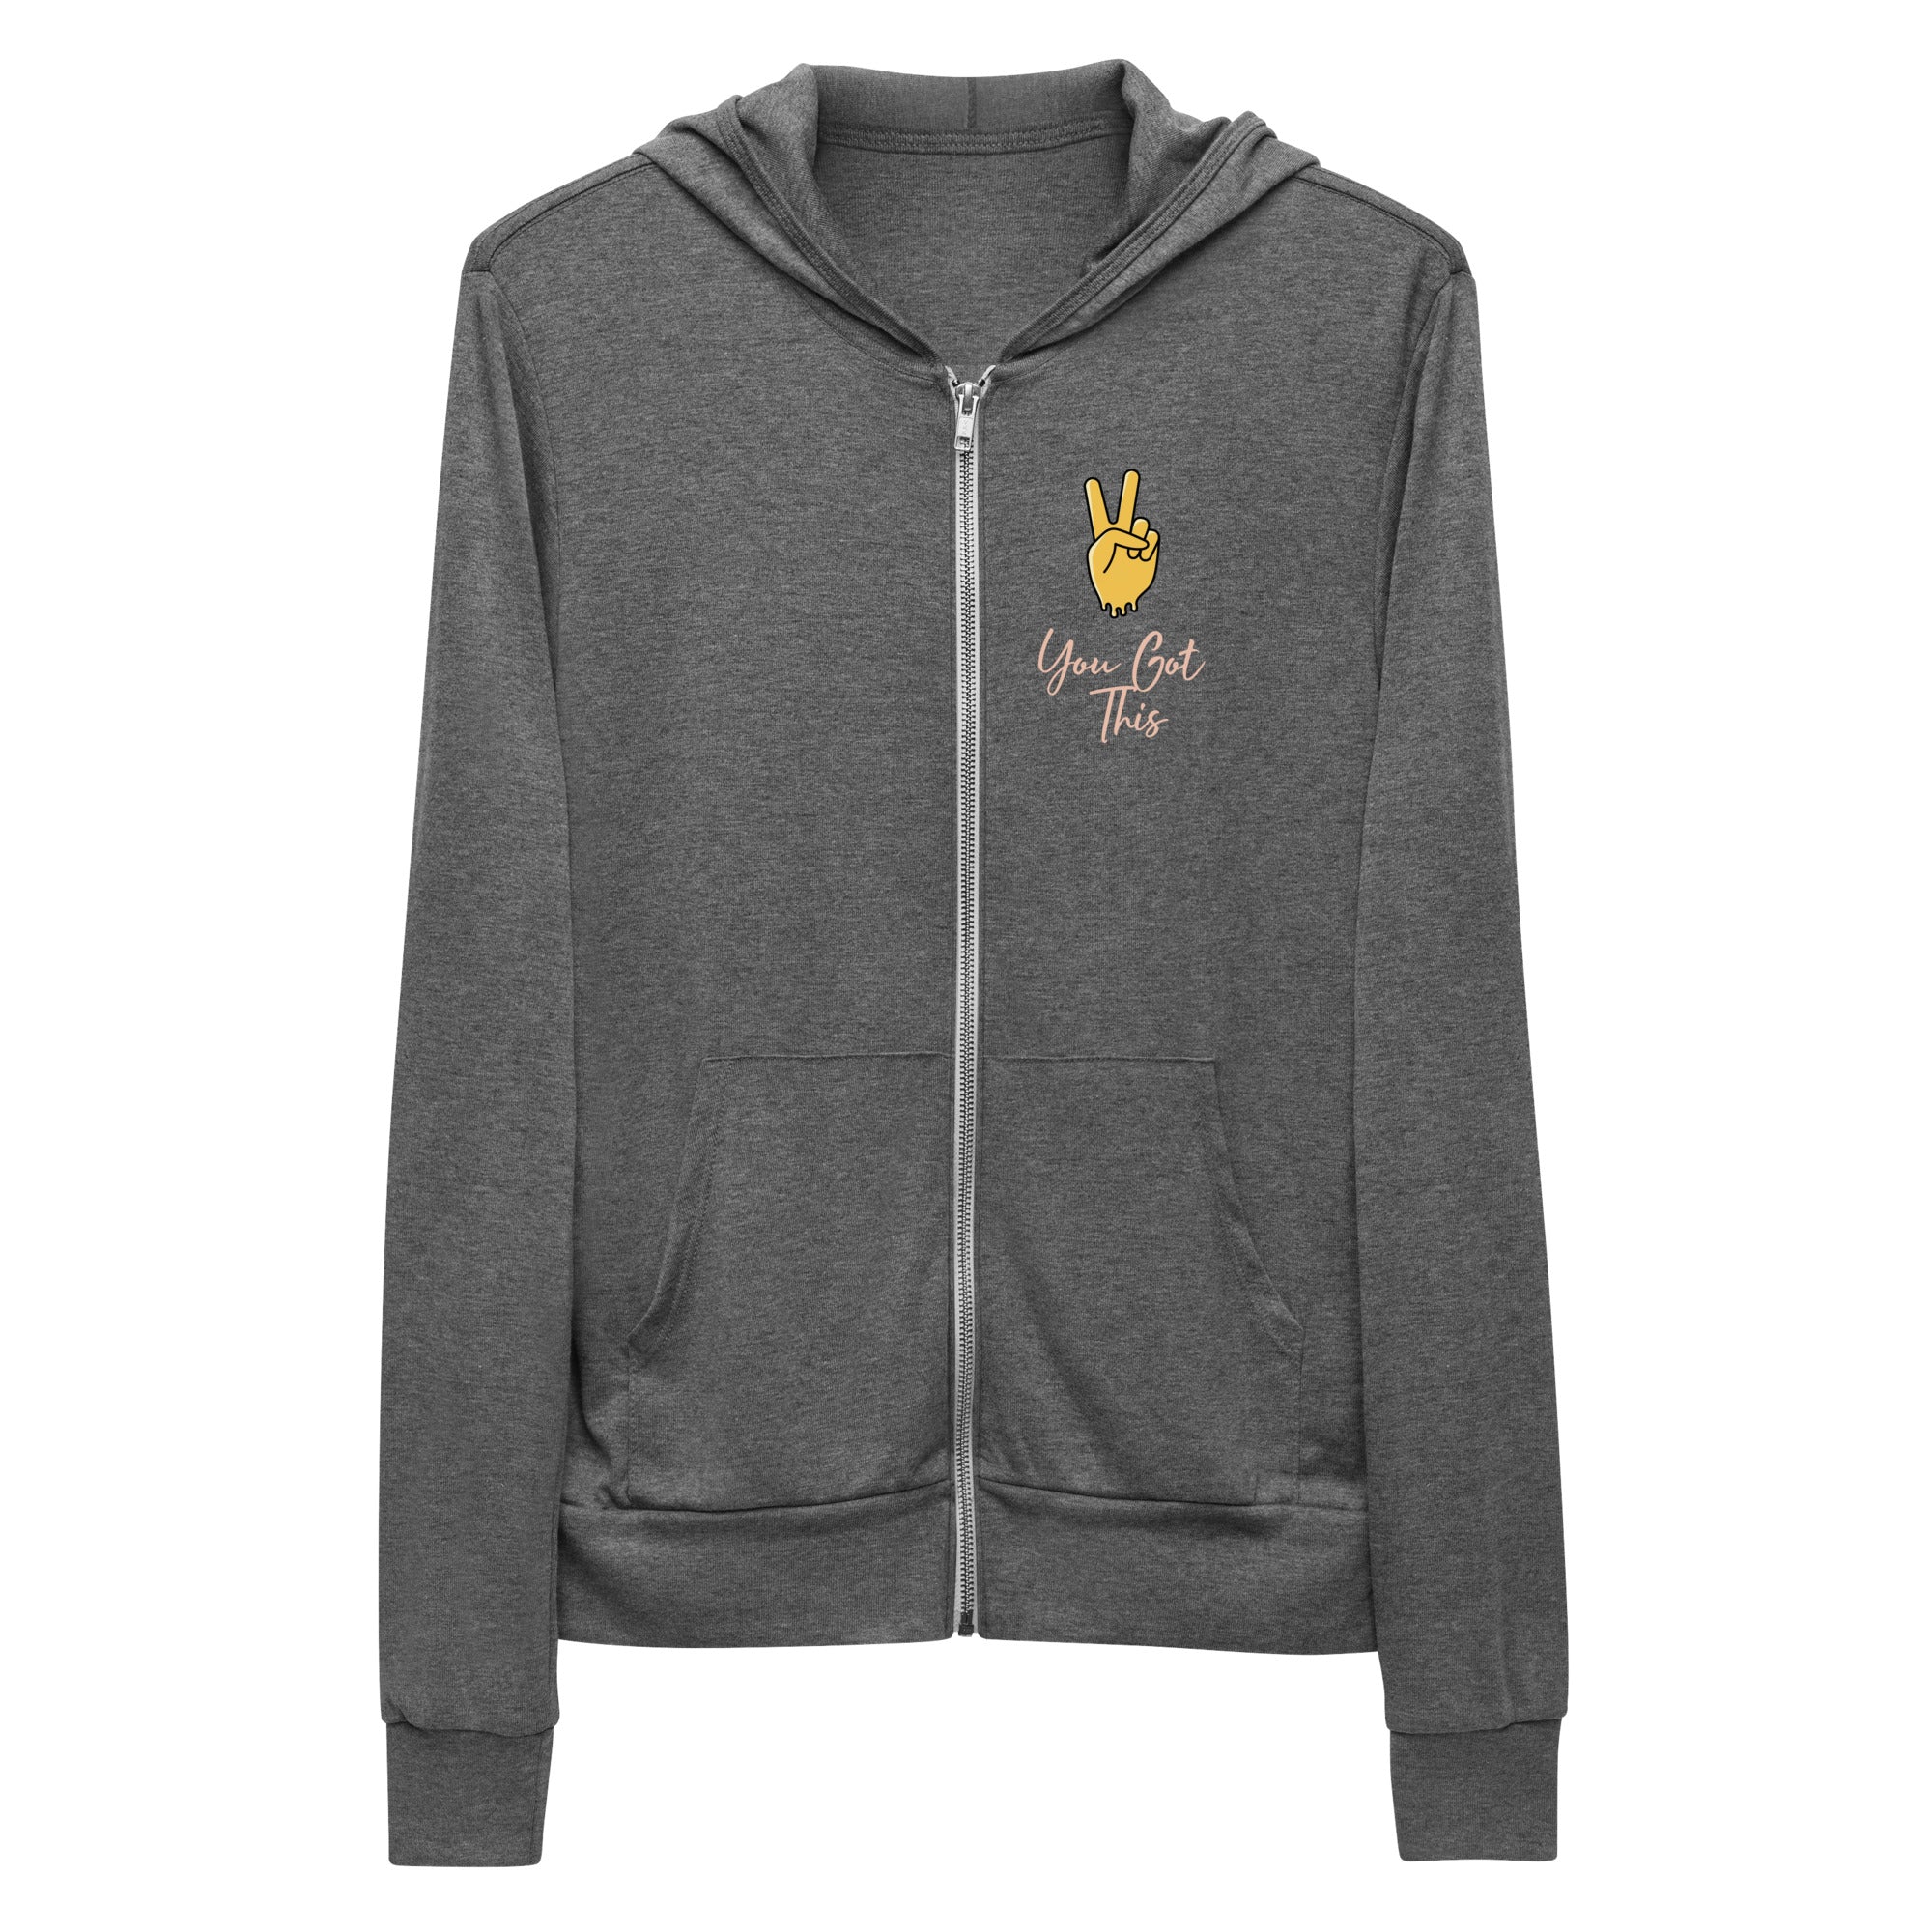 You Got This, Unisex light zip hoodie | Positive Affirmation Clothing